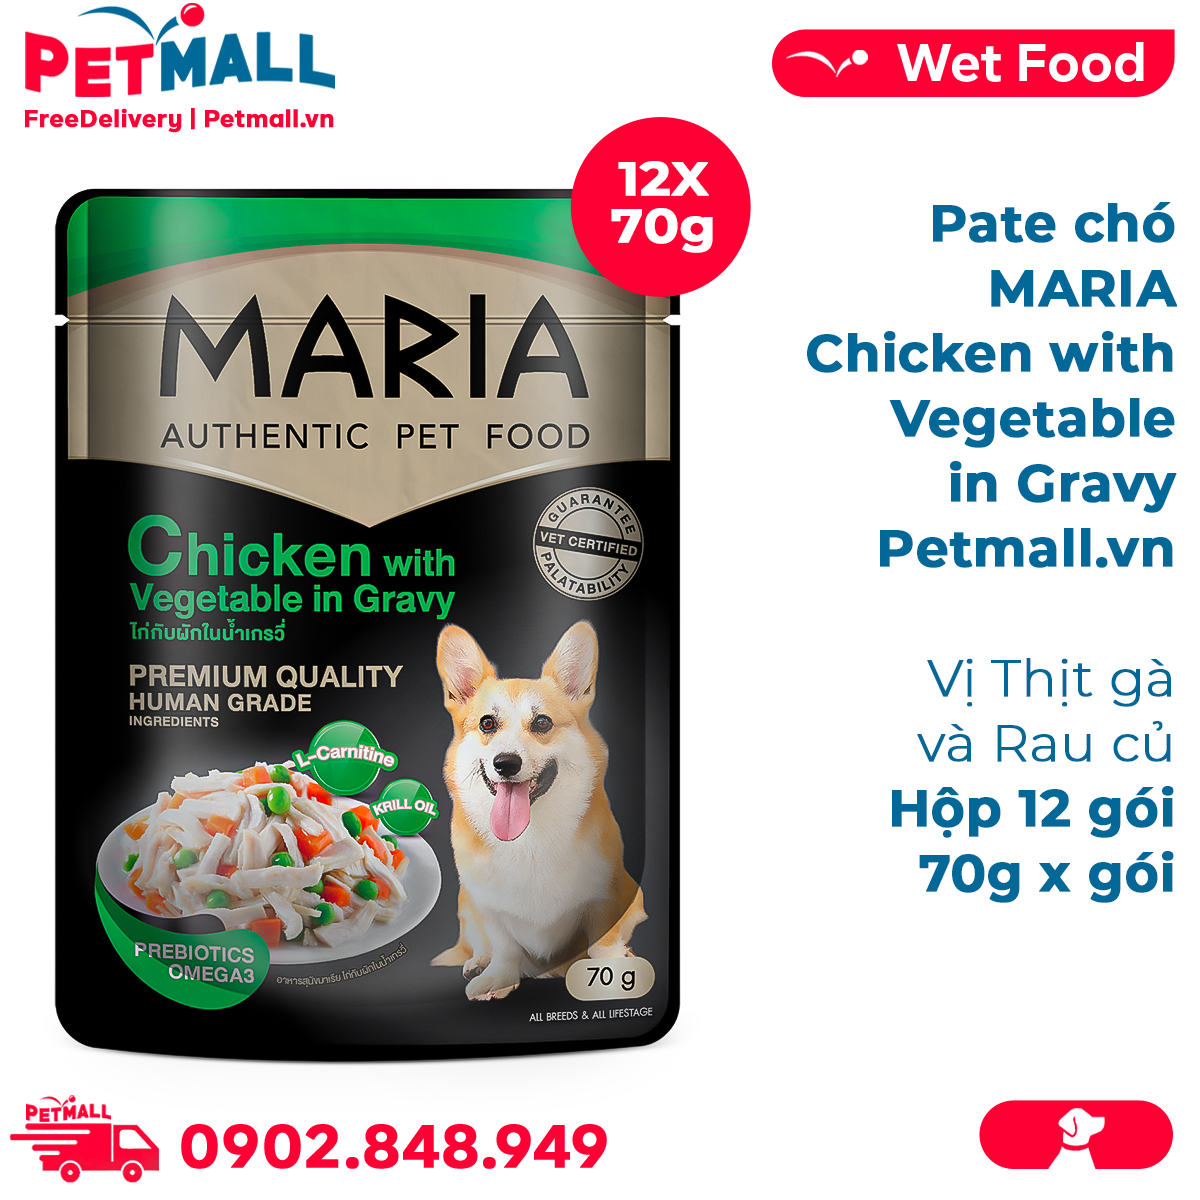 Pate chó MARIA Chicken with Vegetable in Gravy 70g - Hộp 12 gói